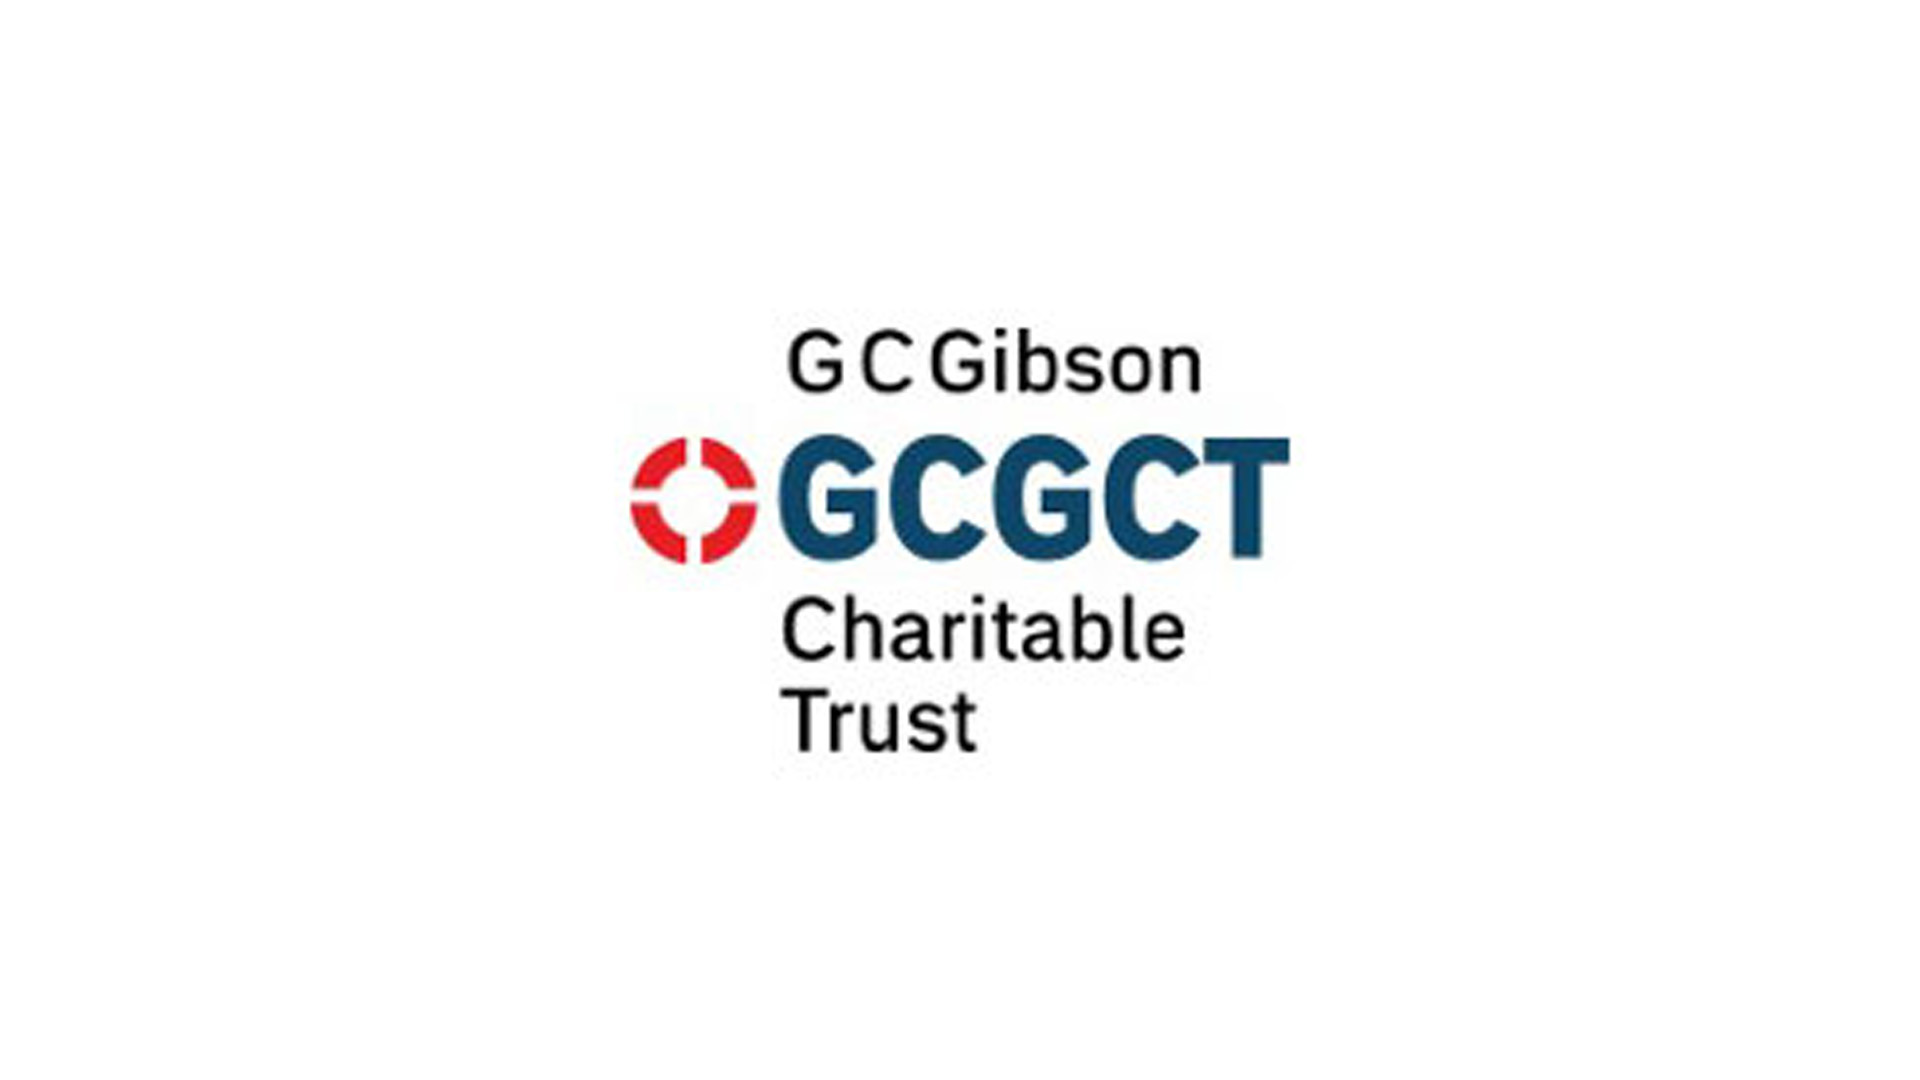 Applications open for G C Gibson Charitable Trust